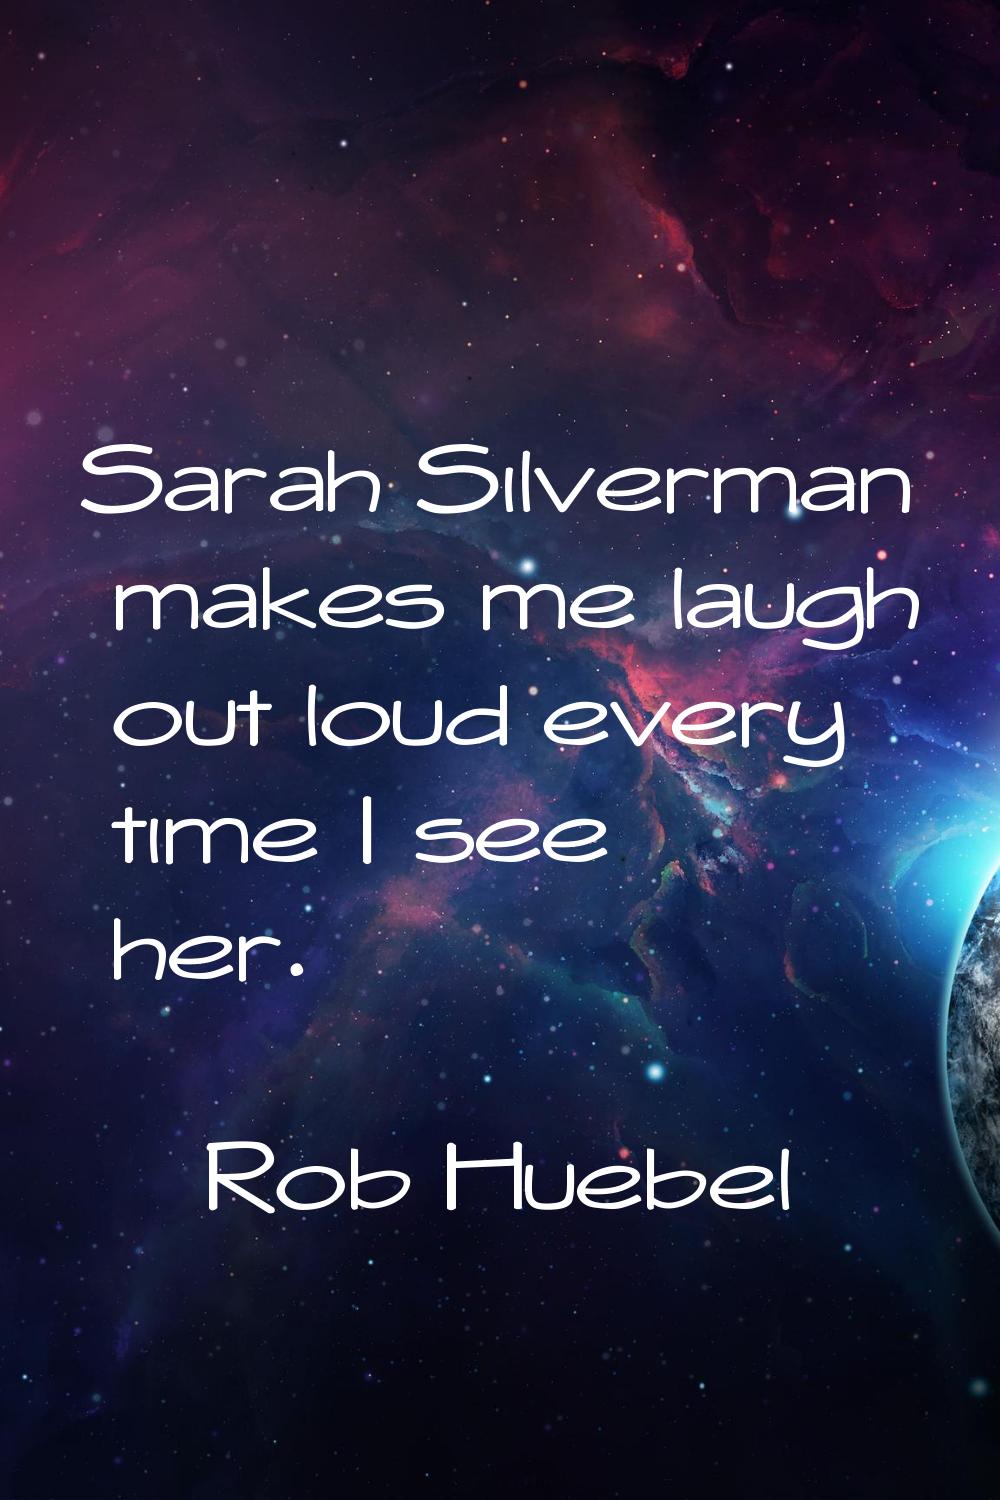 Sarah Silverman makes me laugh out loud every time I see her.